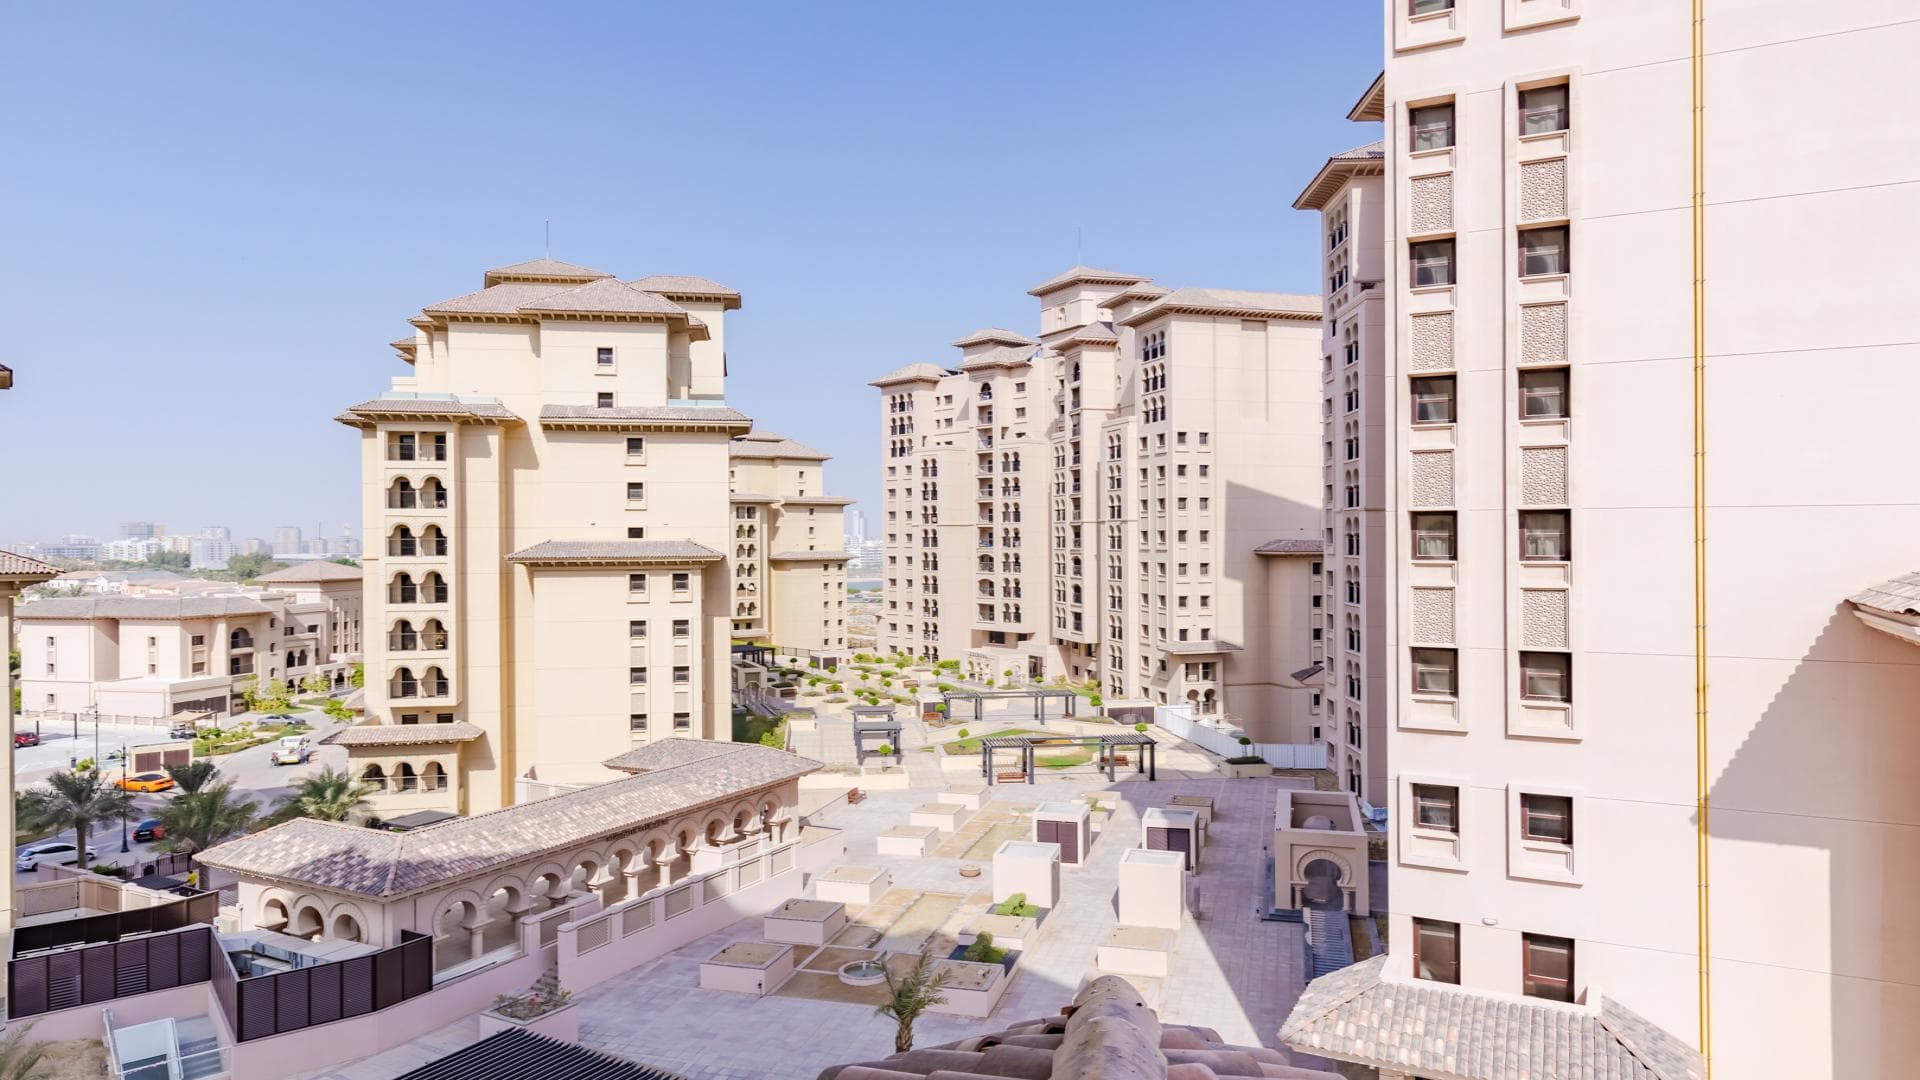 2 Bedroom Apartment For Sale Al Andalus Lp37400 22780caa7119ac00.jpg